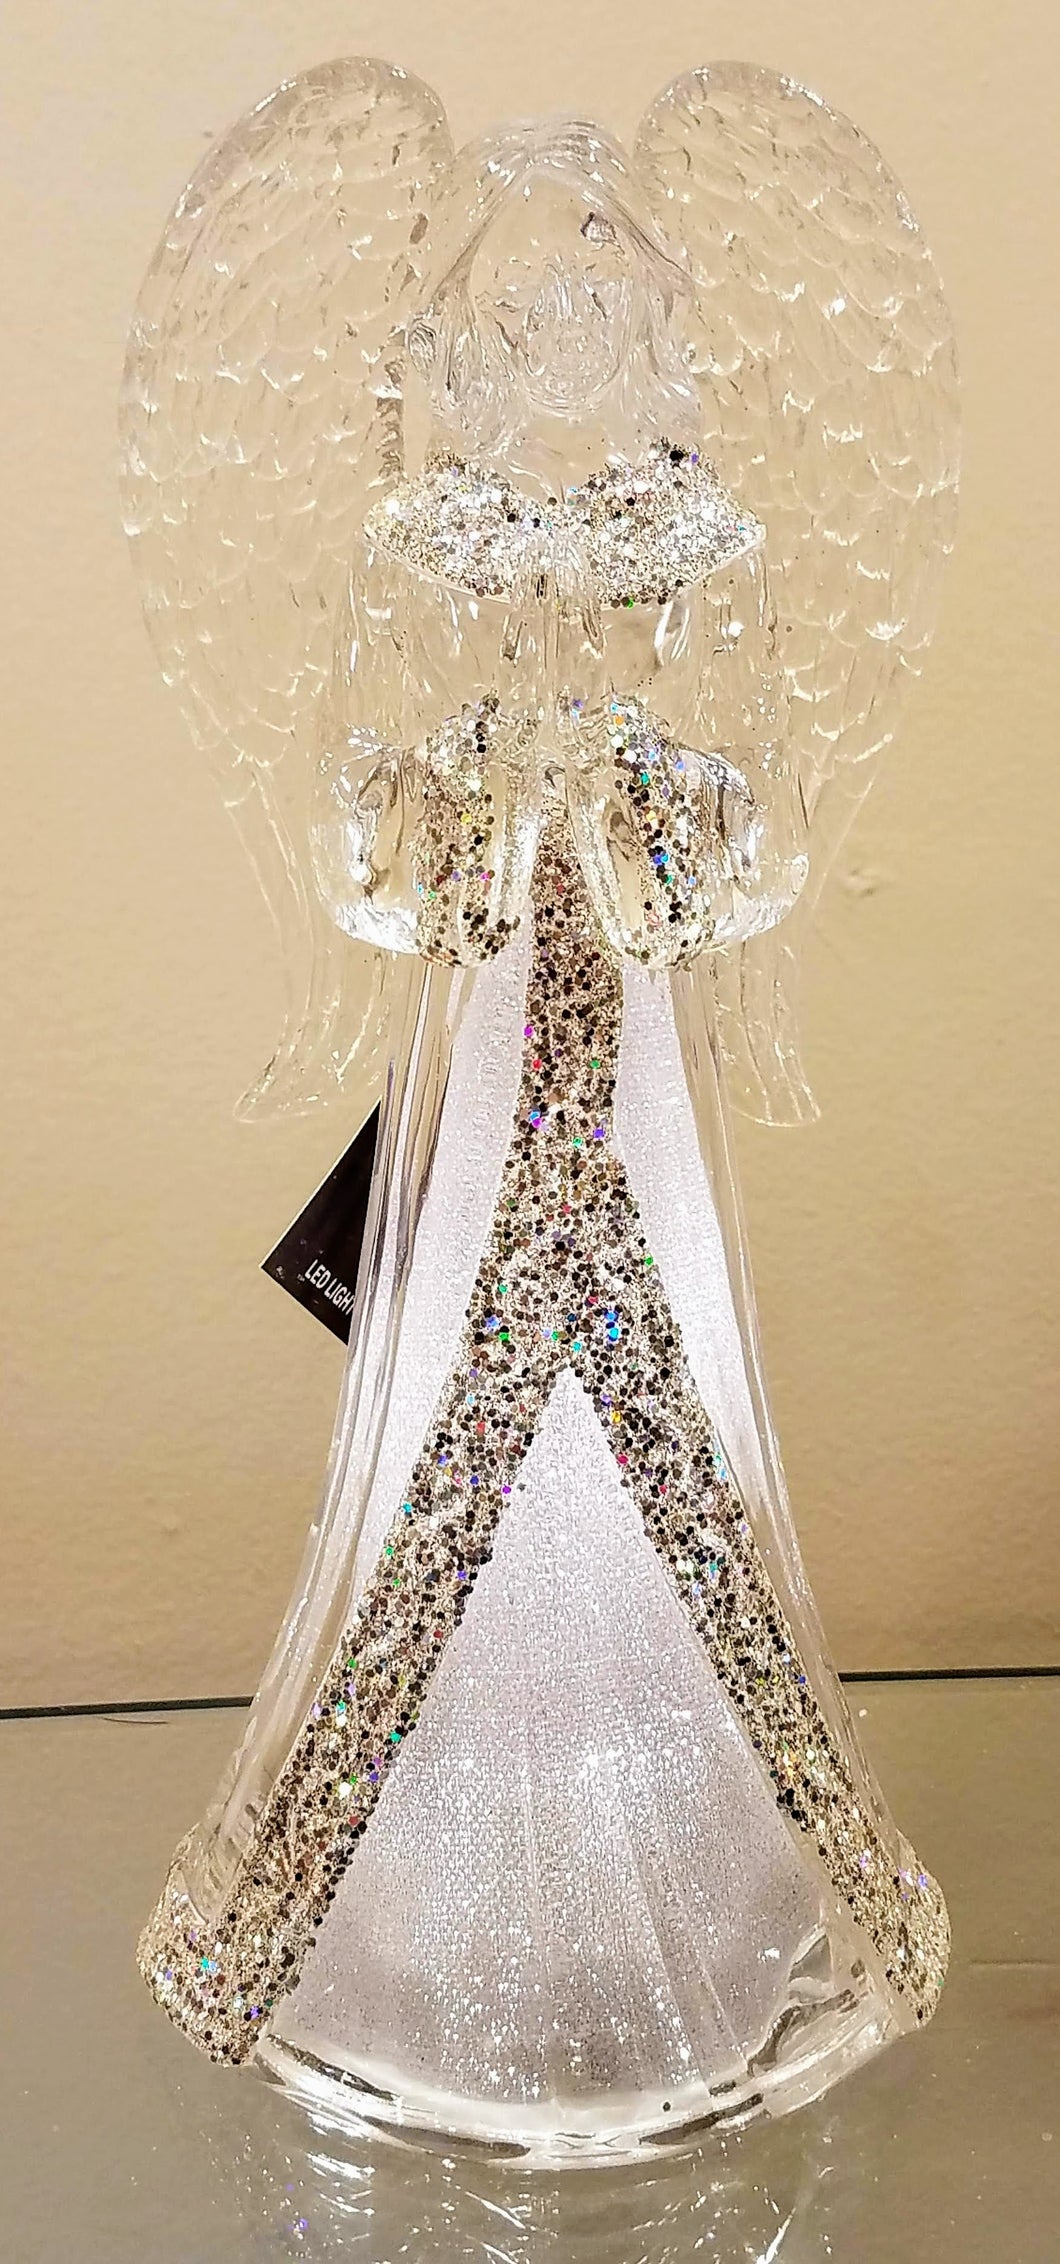 Acrylic silver angel figurine with glitter & lights up 9